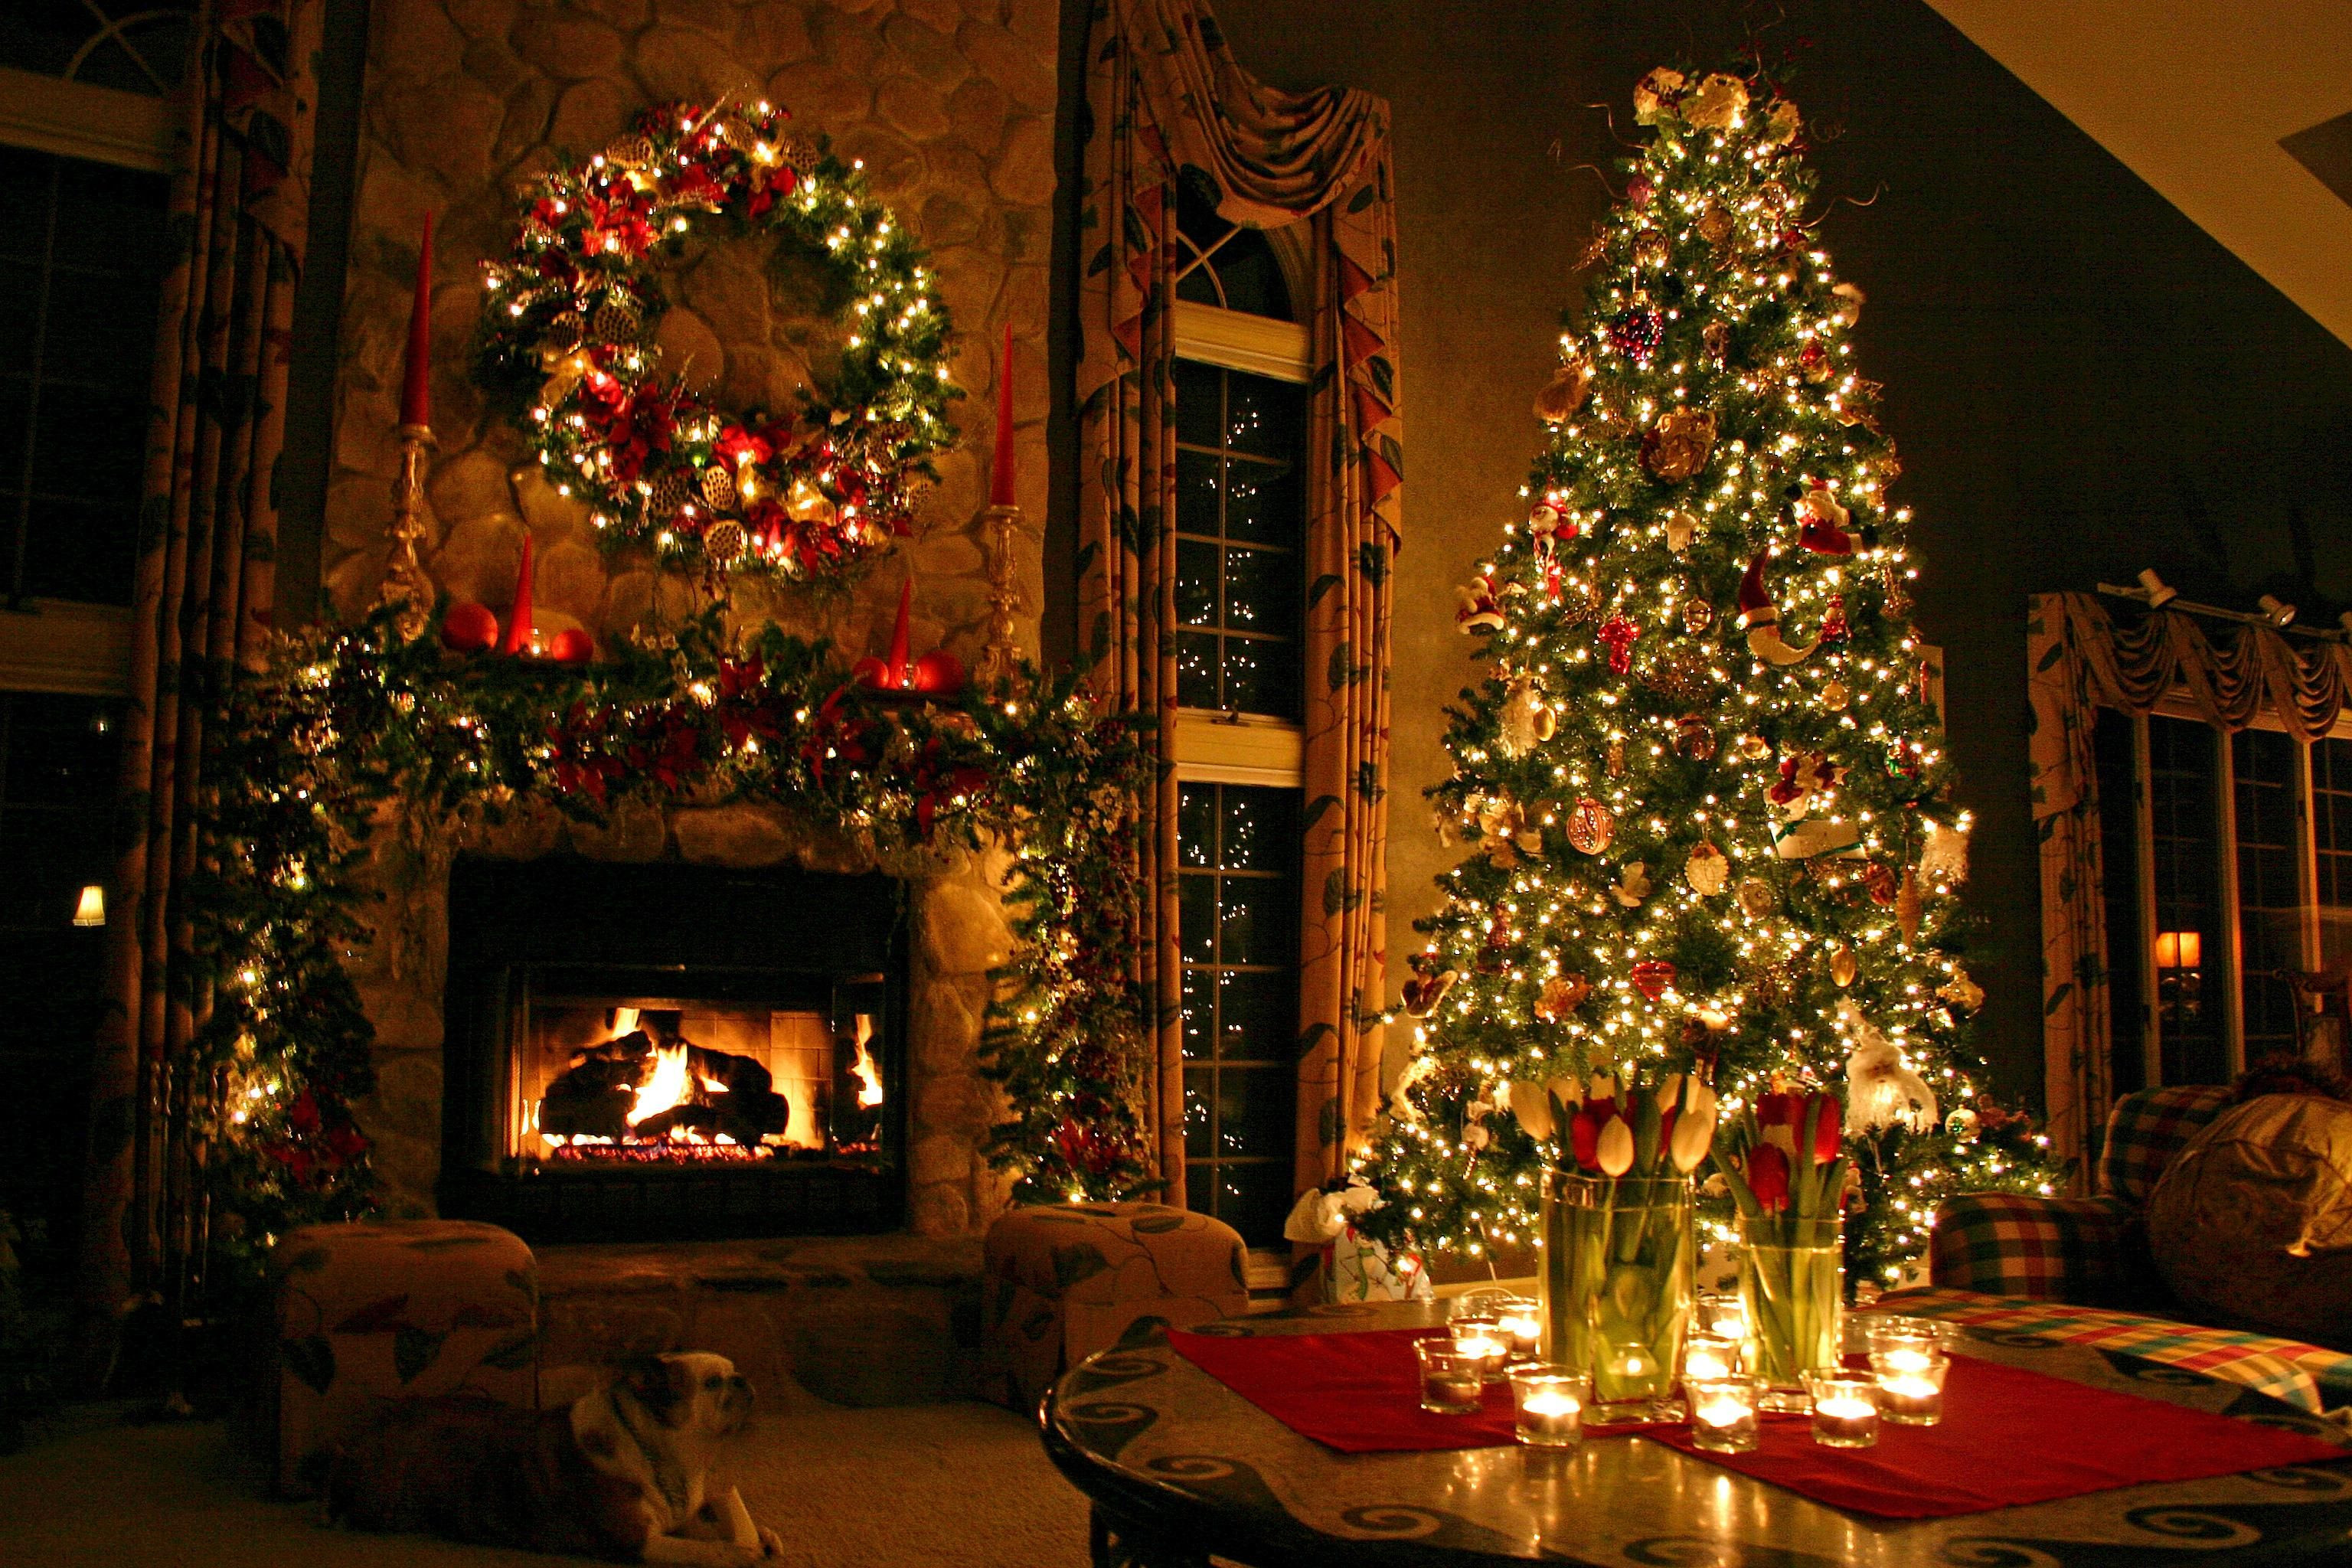 Christmas Tree With Fireplace
 A cozy scene with a beautiful Christmas tree wreath